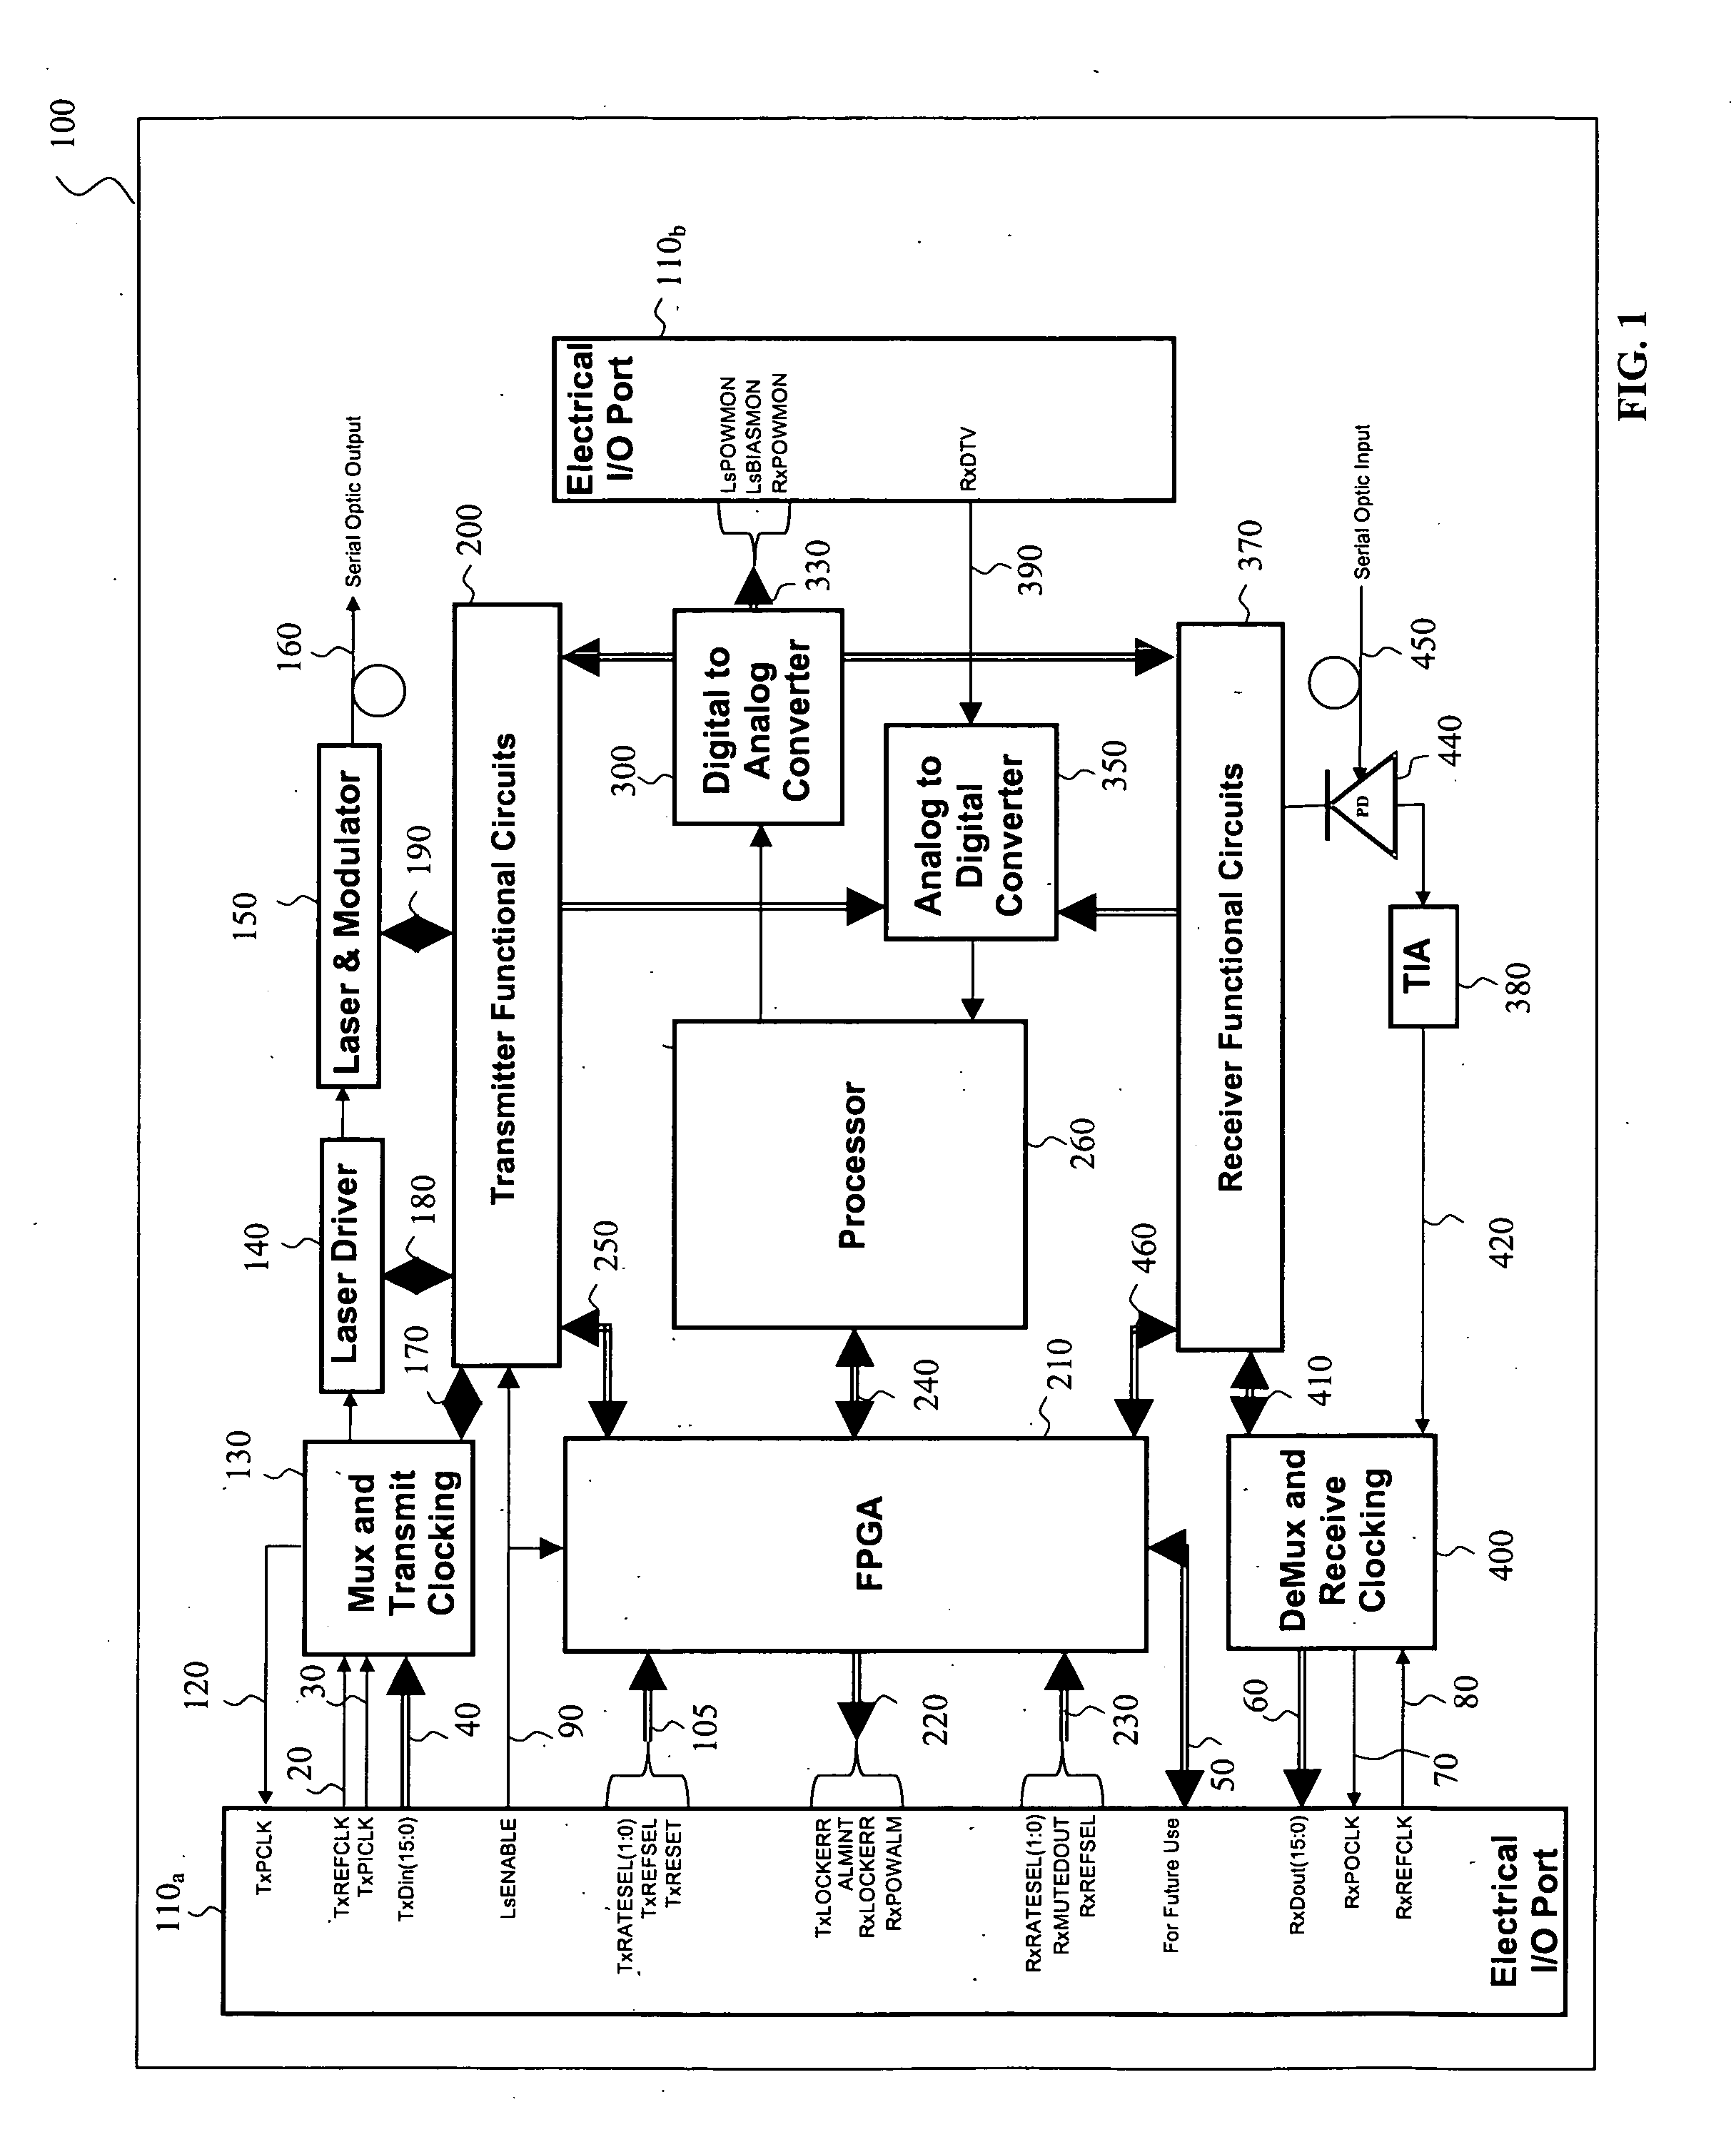 Flexible control and status architecture for optical modules